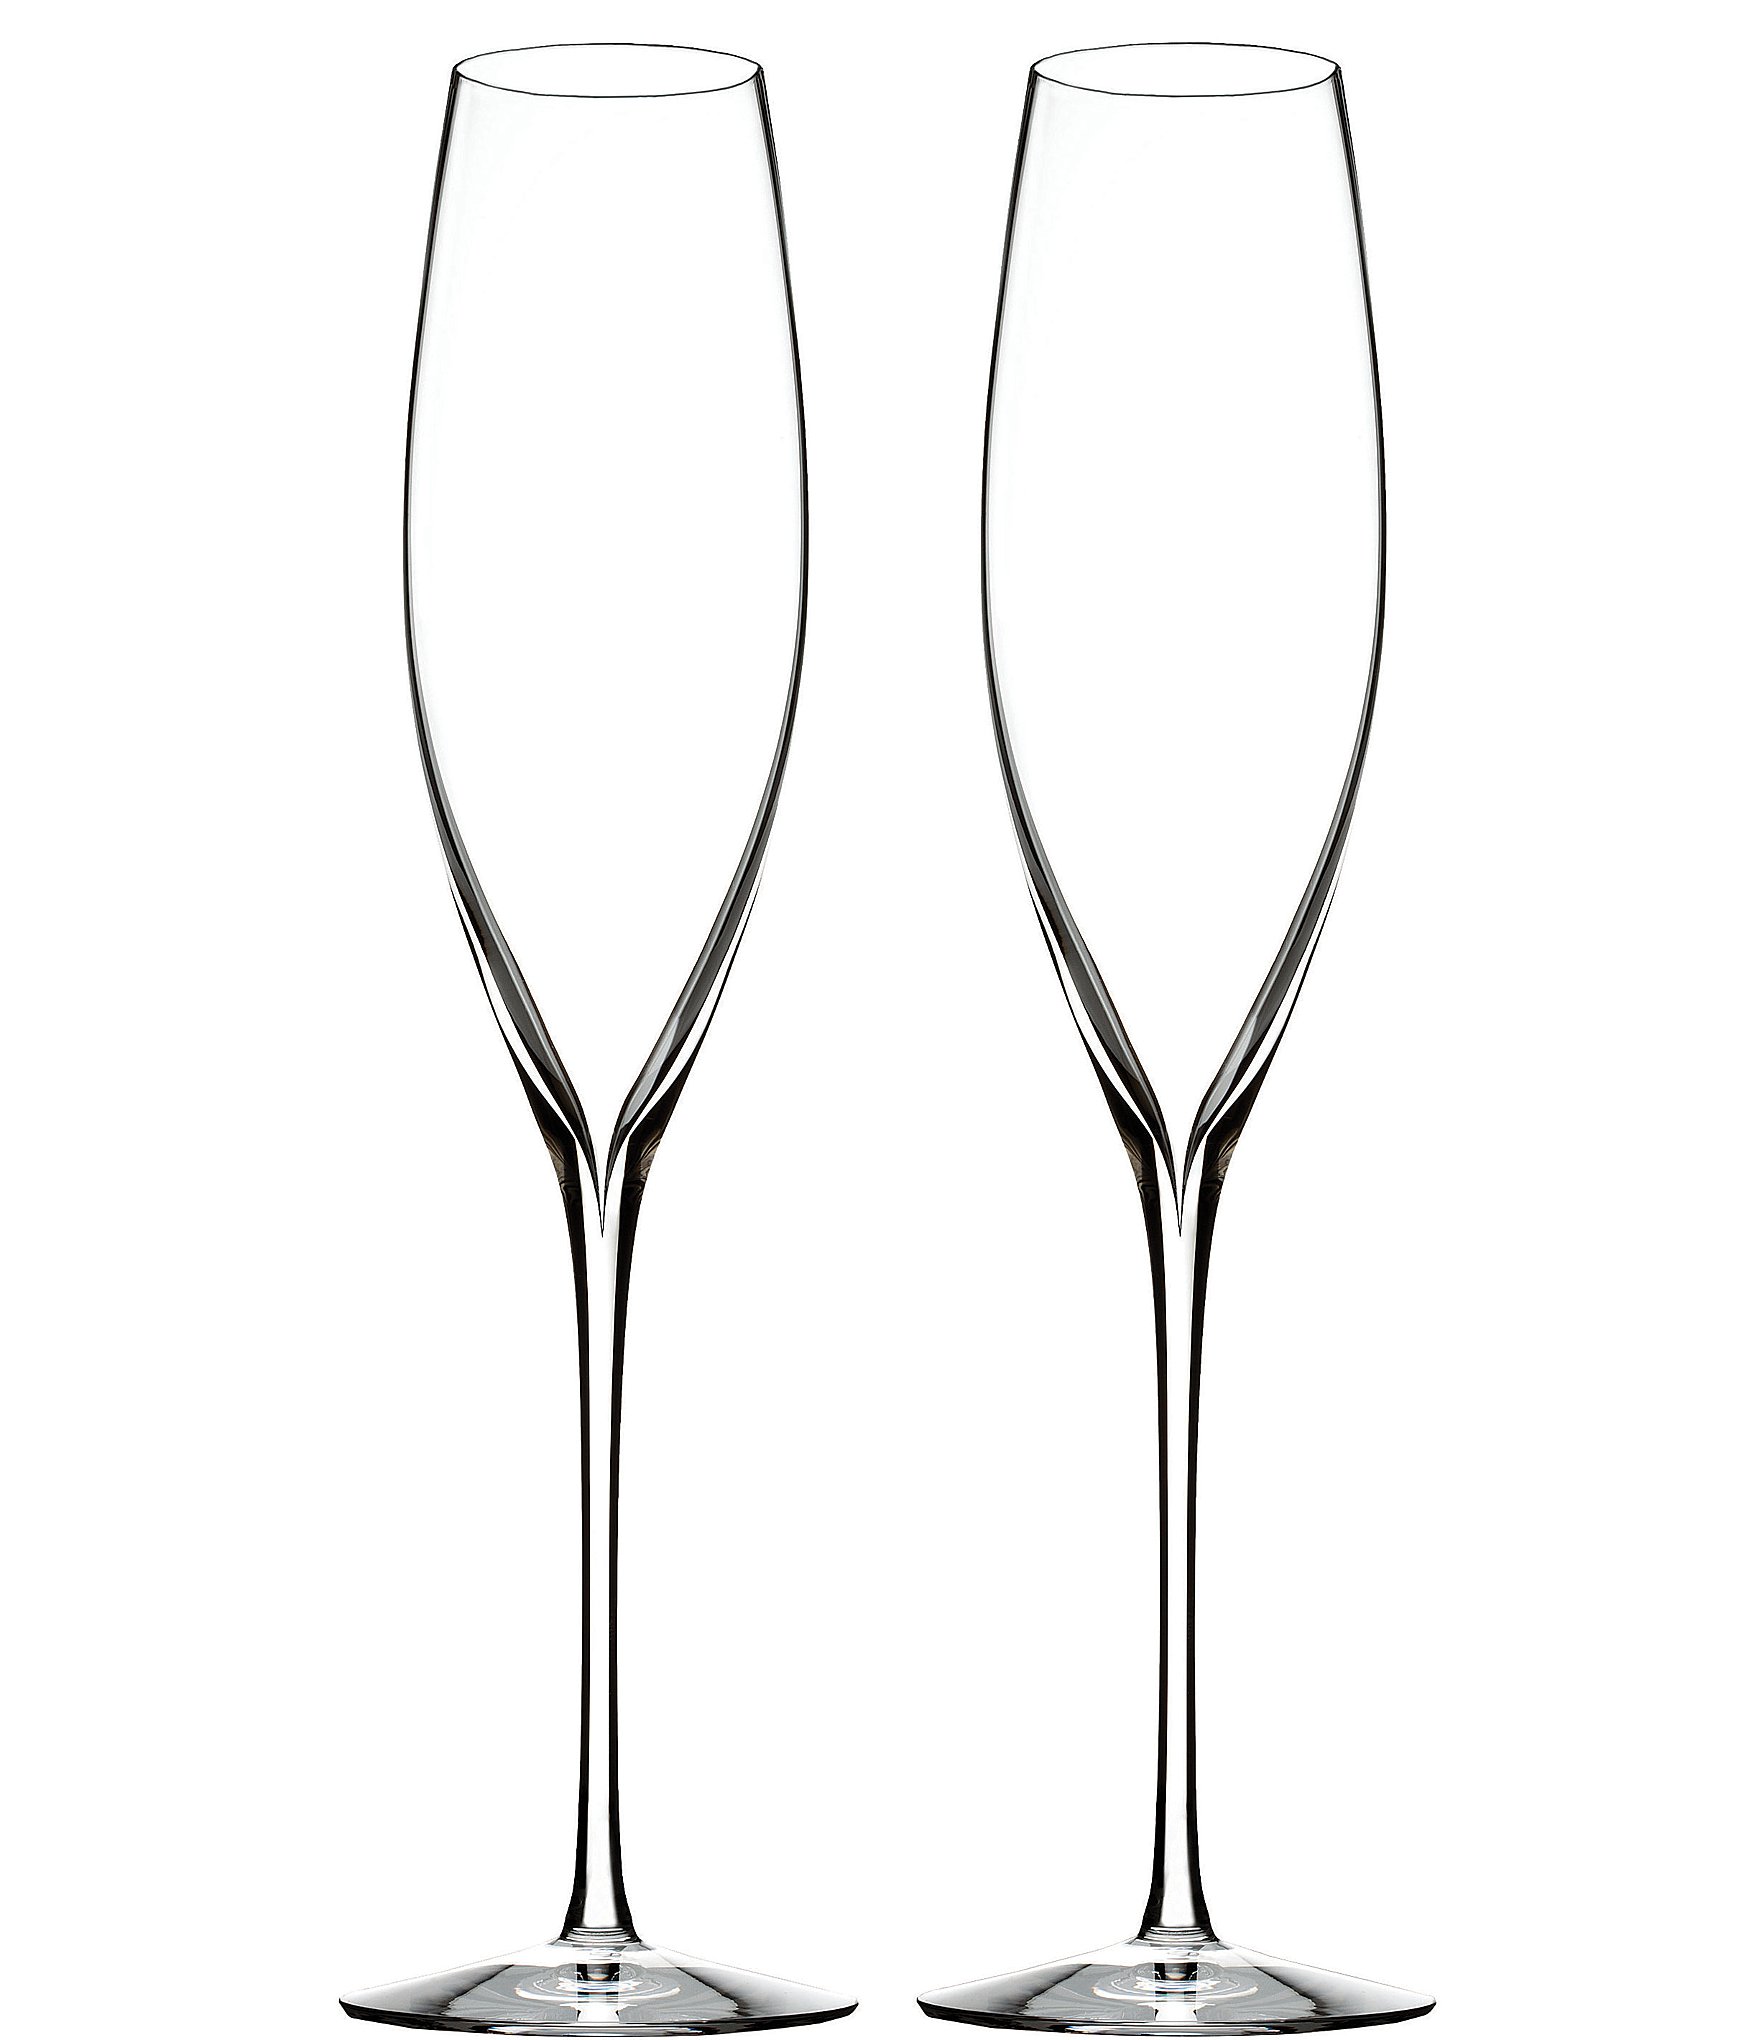 https://dimg.dillards.com/is/image/DillardsZoom/zoom/waterford-elegance-collection-classic-crystal-champagne-flute-pair/00000000_zi_b853d90c-69bb-465c-ad2e-788fddb71968.jpg